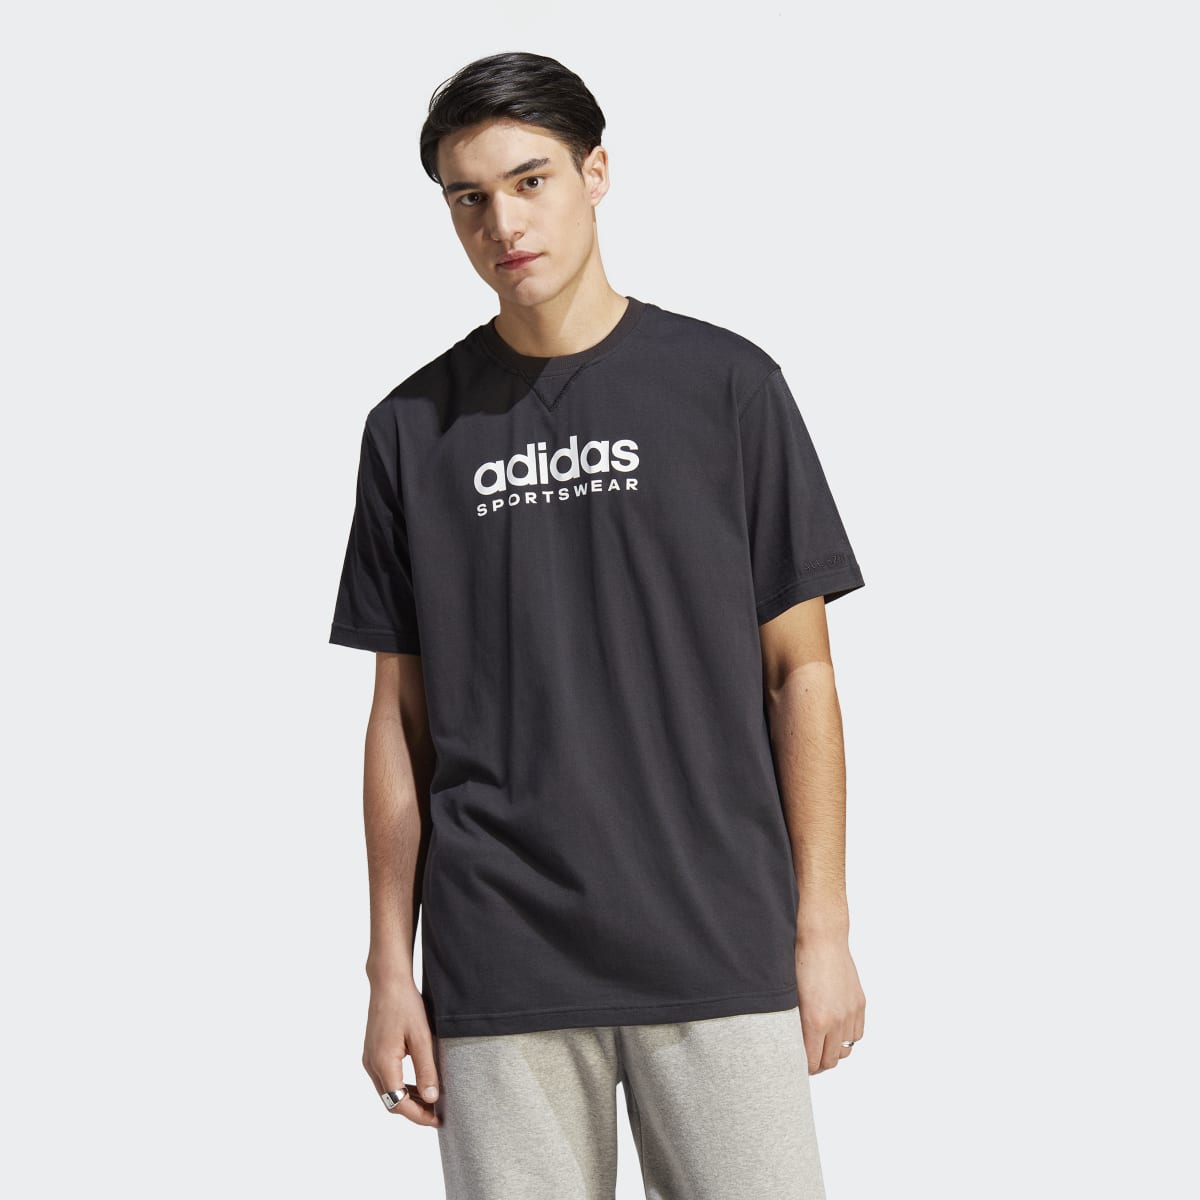 PriceGrabber - All SZN Graphic Tee | Adidas | $55